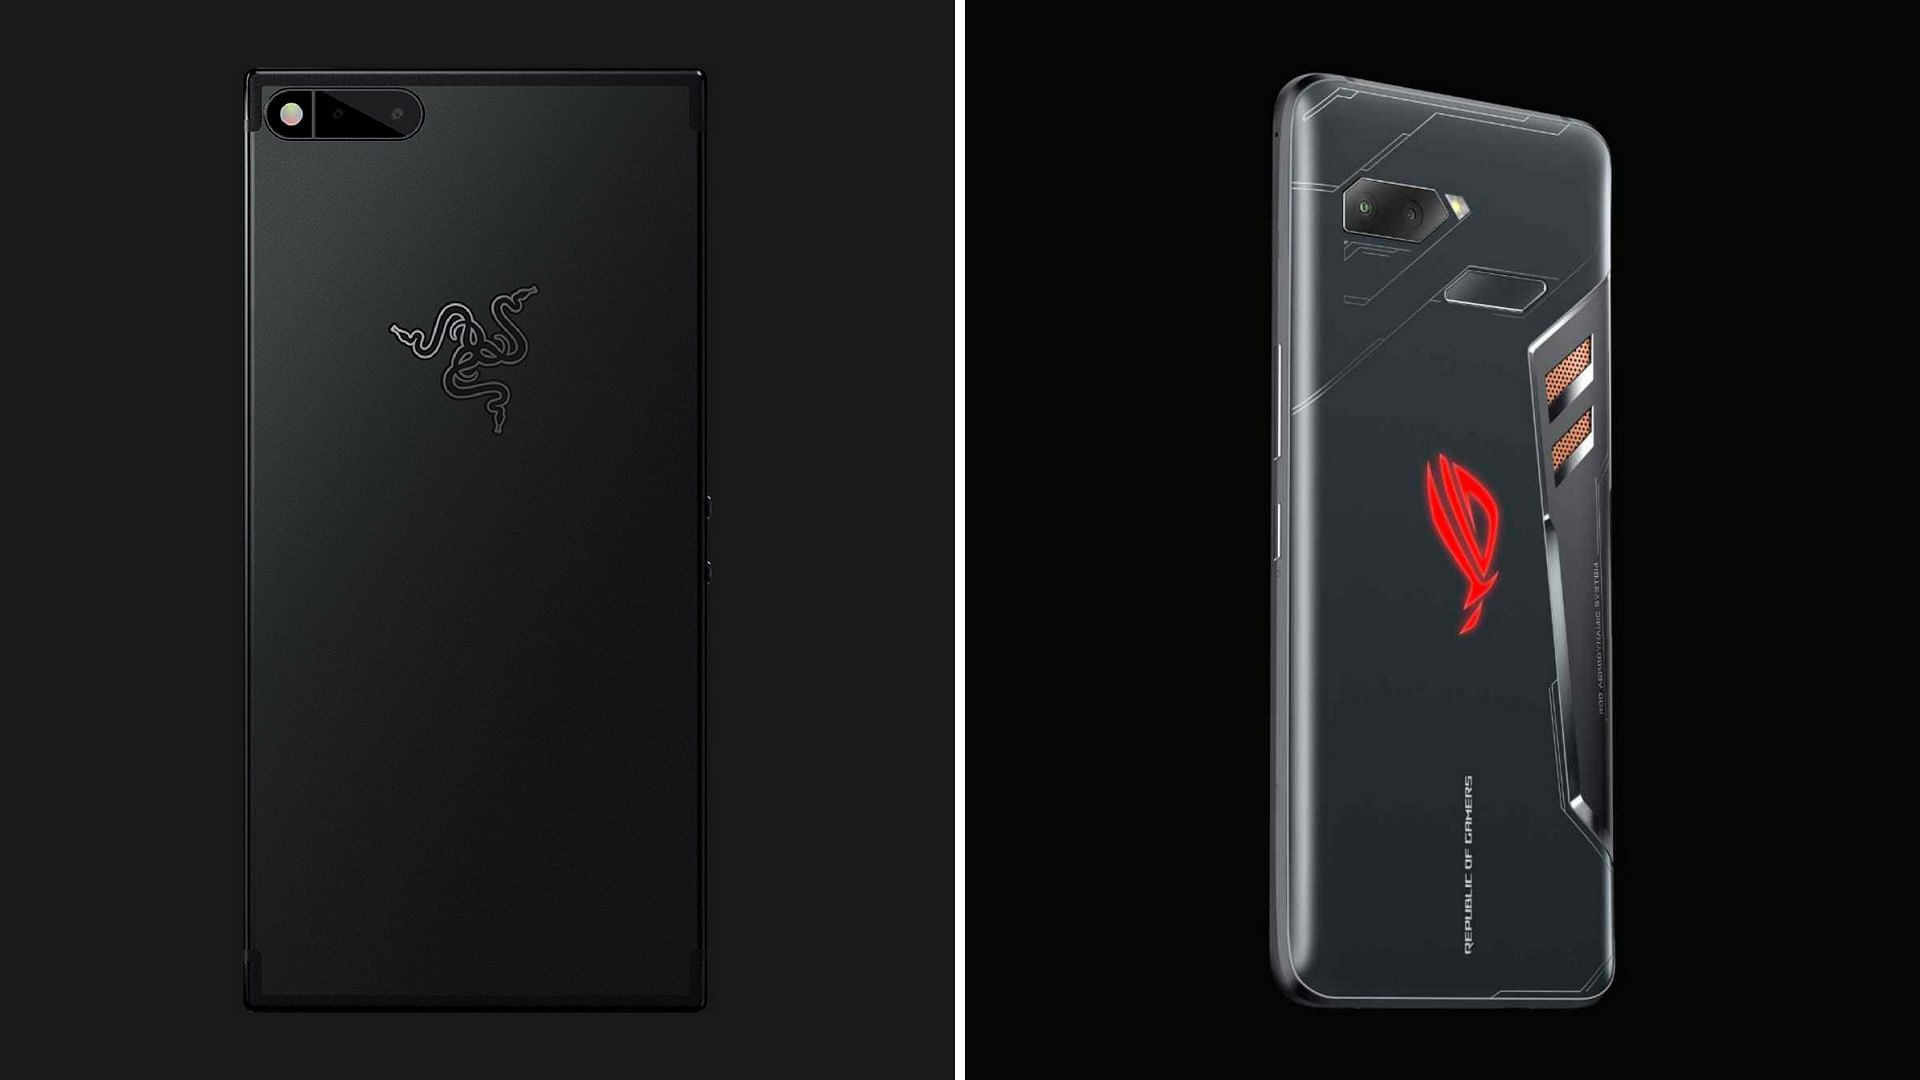 The Razer Phone when launched in India will be pitted against the Asus ROG Phone.